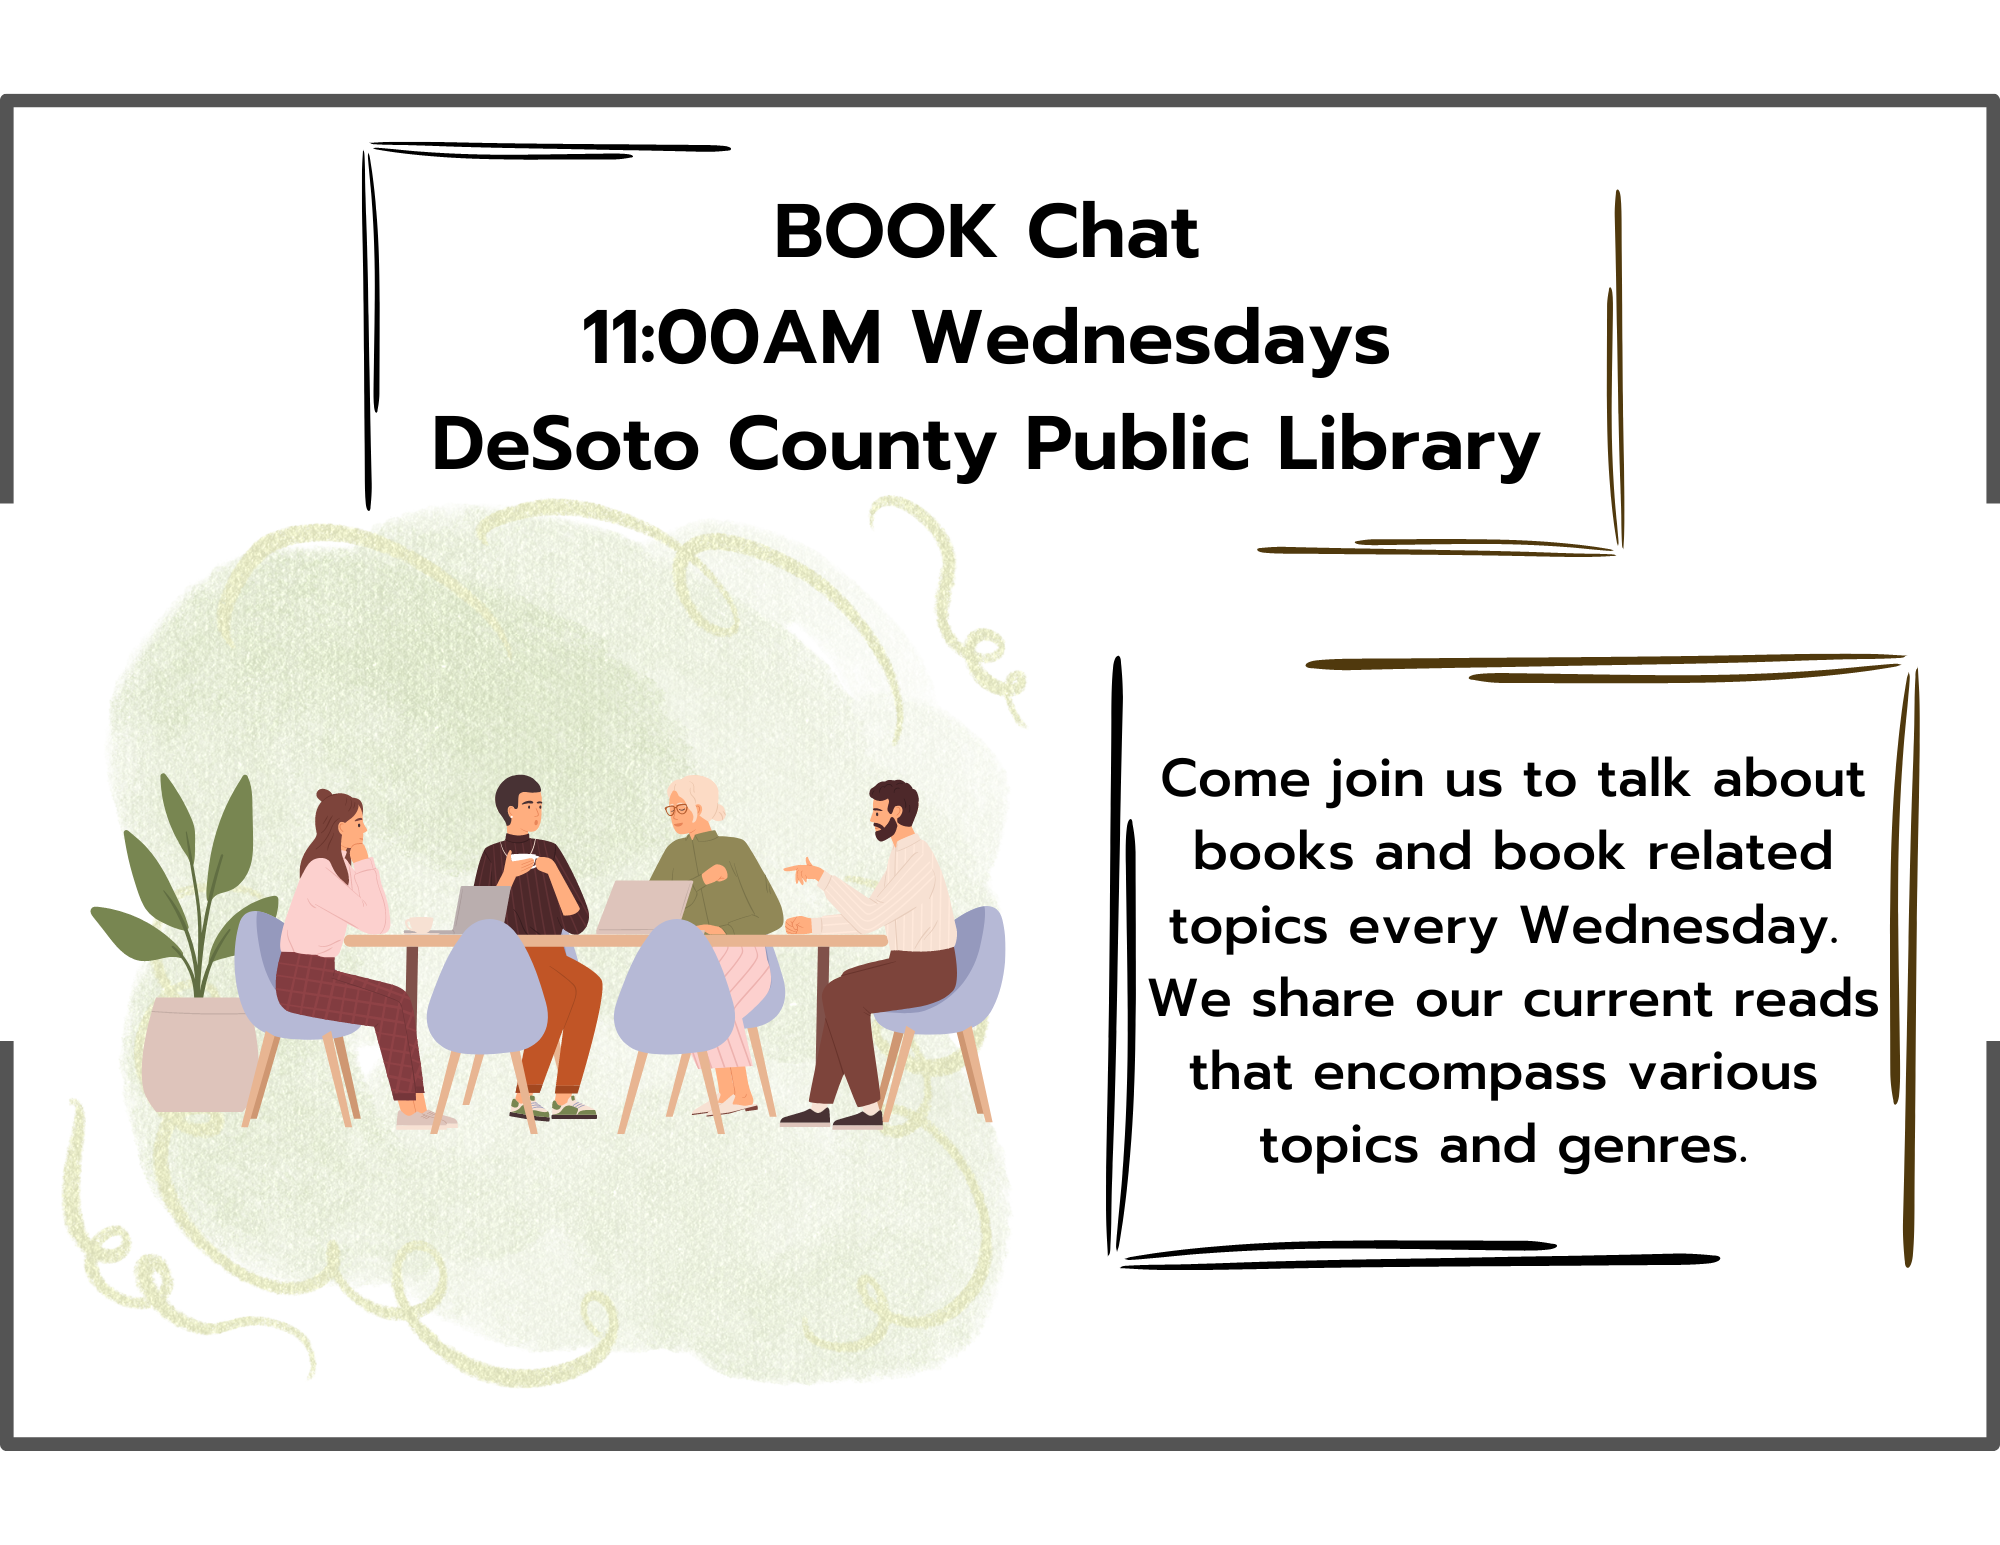 Join Desoto County library every Wednesday for a weekly book chat. Share current reads and discuss all things books!